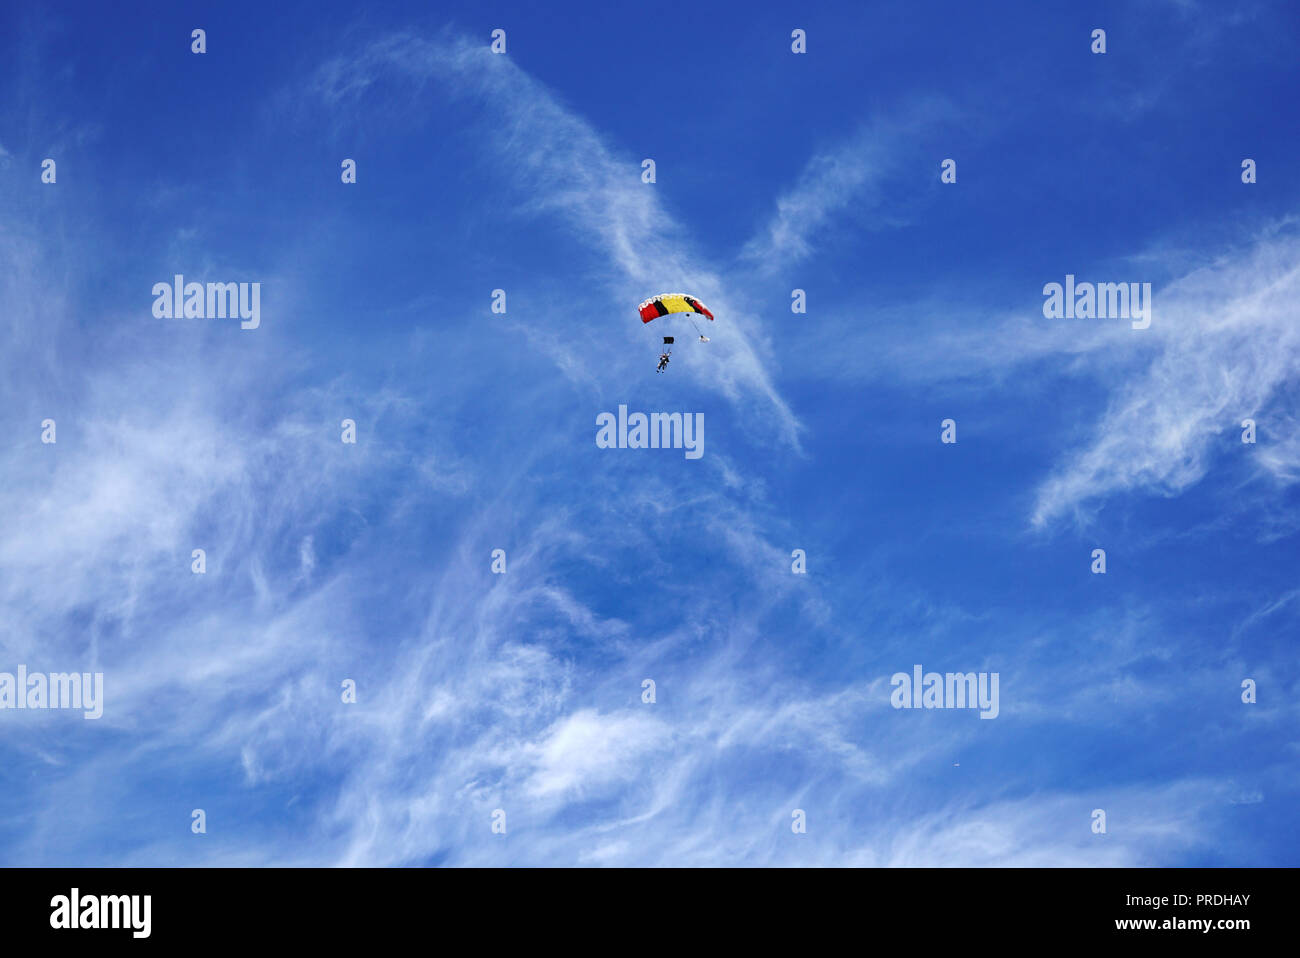 Bright multicolor parachute canopy and skydivers against the background of a blurry white clouds and a blue sky. Tandem master with passenger is flyin Stock Photo